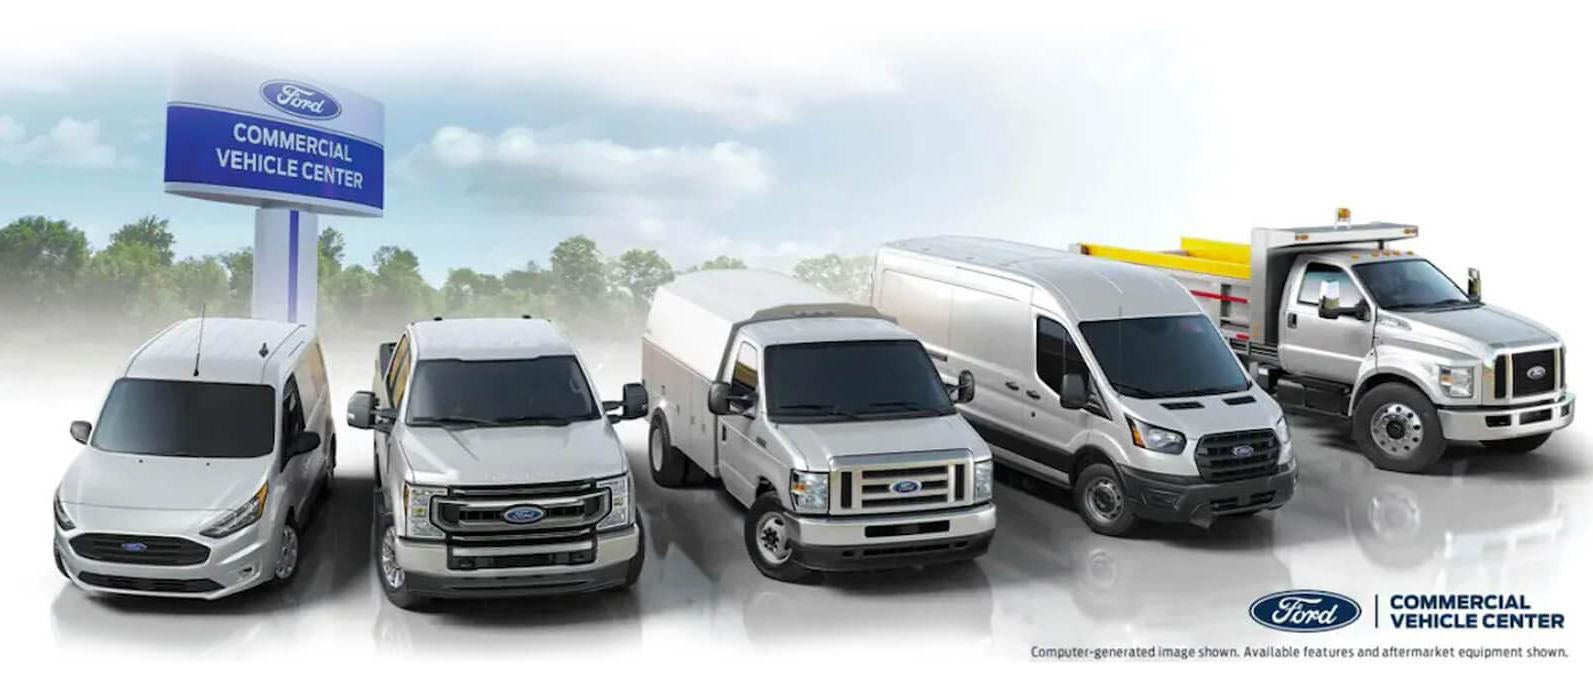 image of commercial vehicles